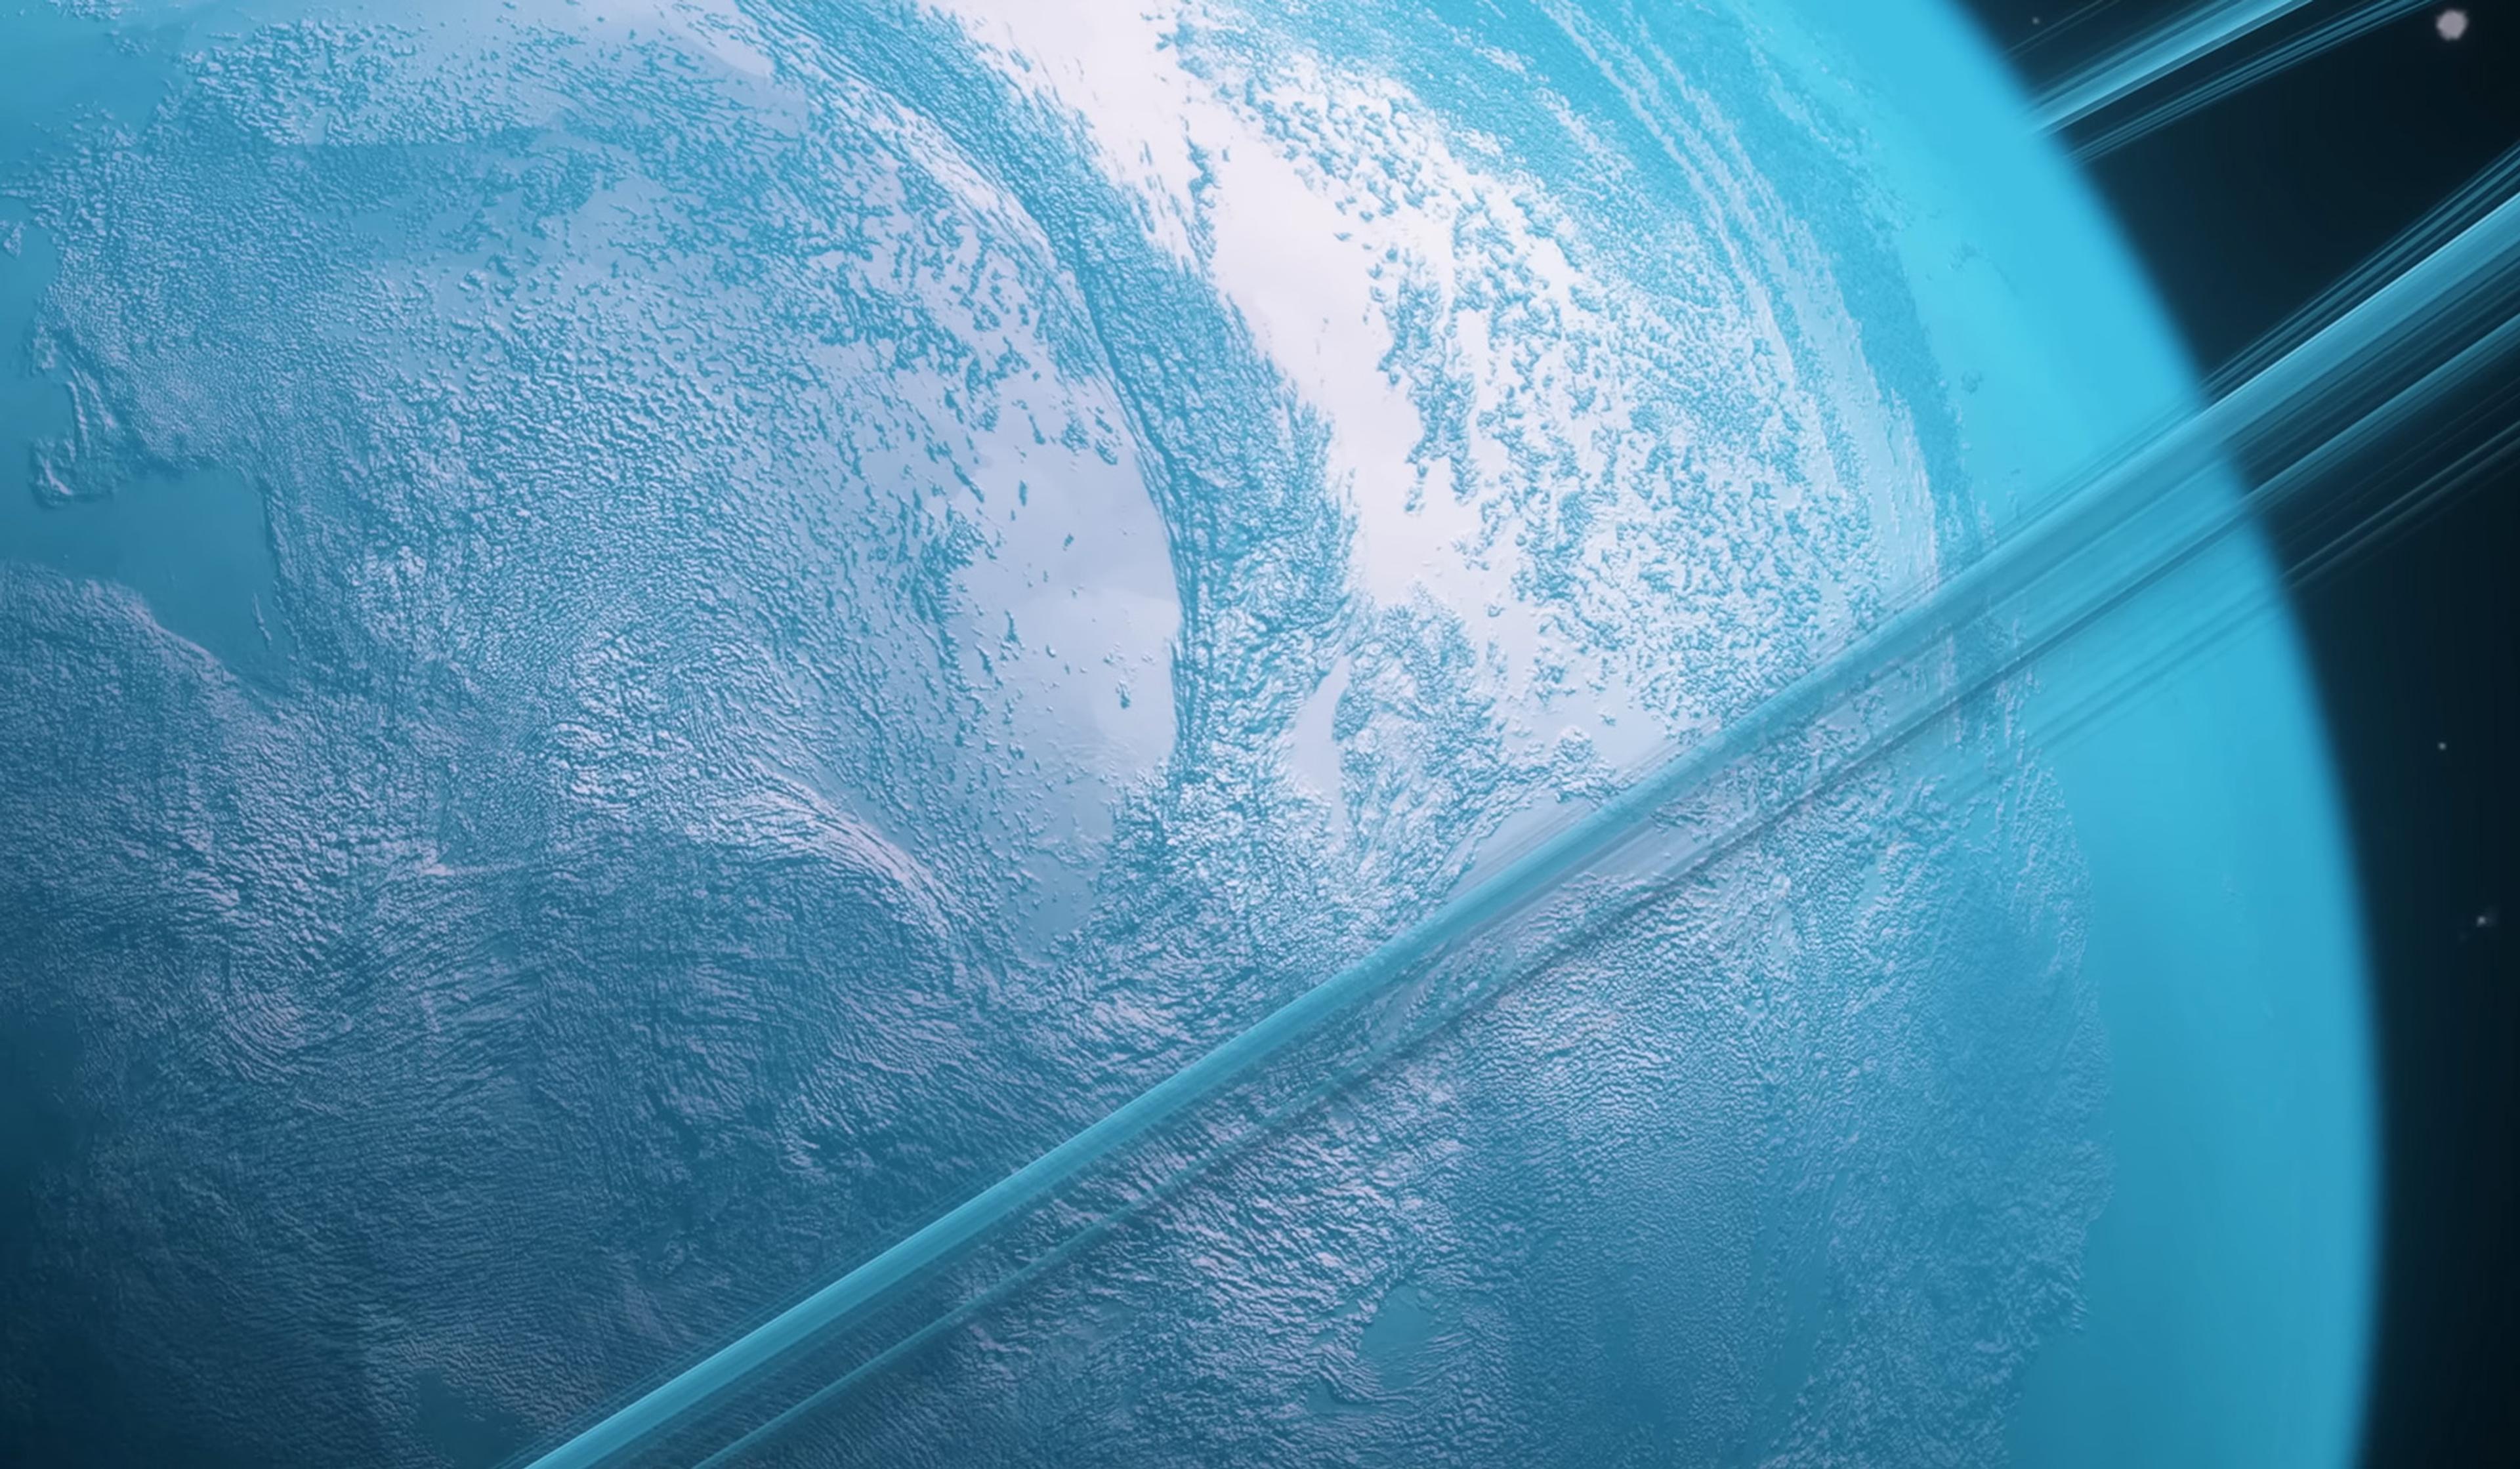 A blue planet with visible ice formations and rings, resembling a view of an icy gas giant from space.